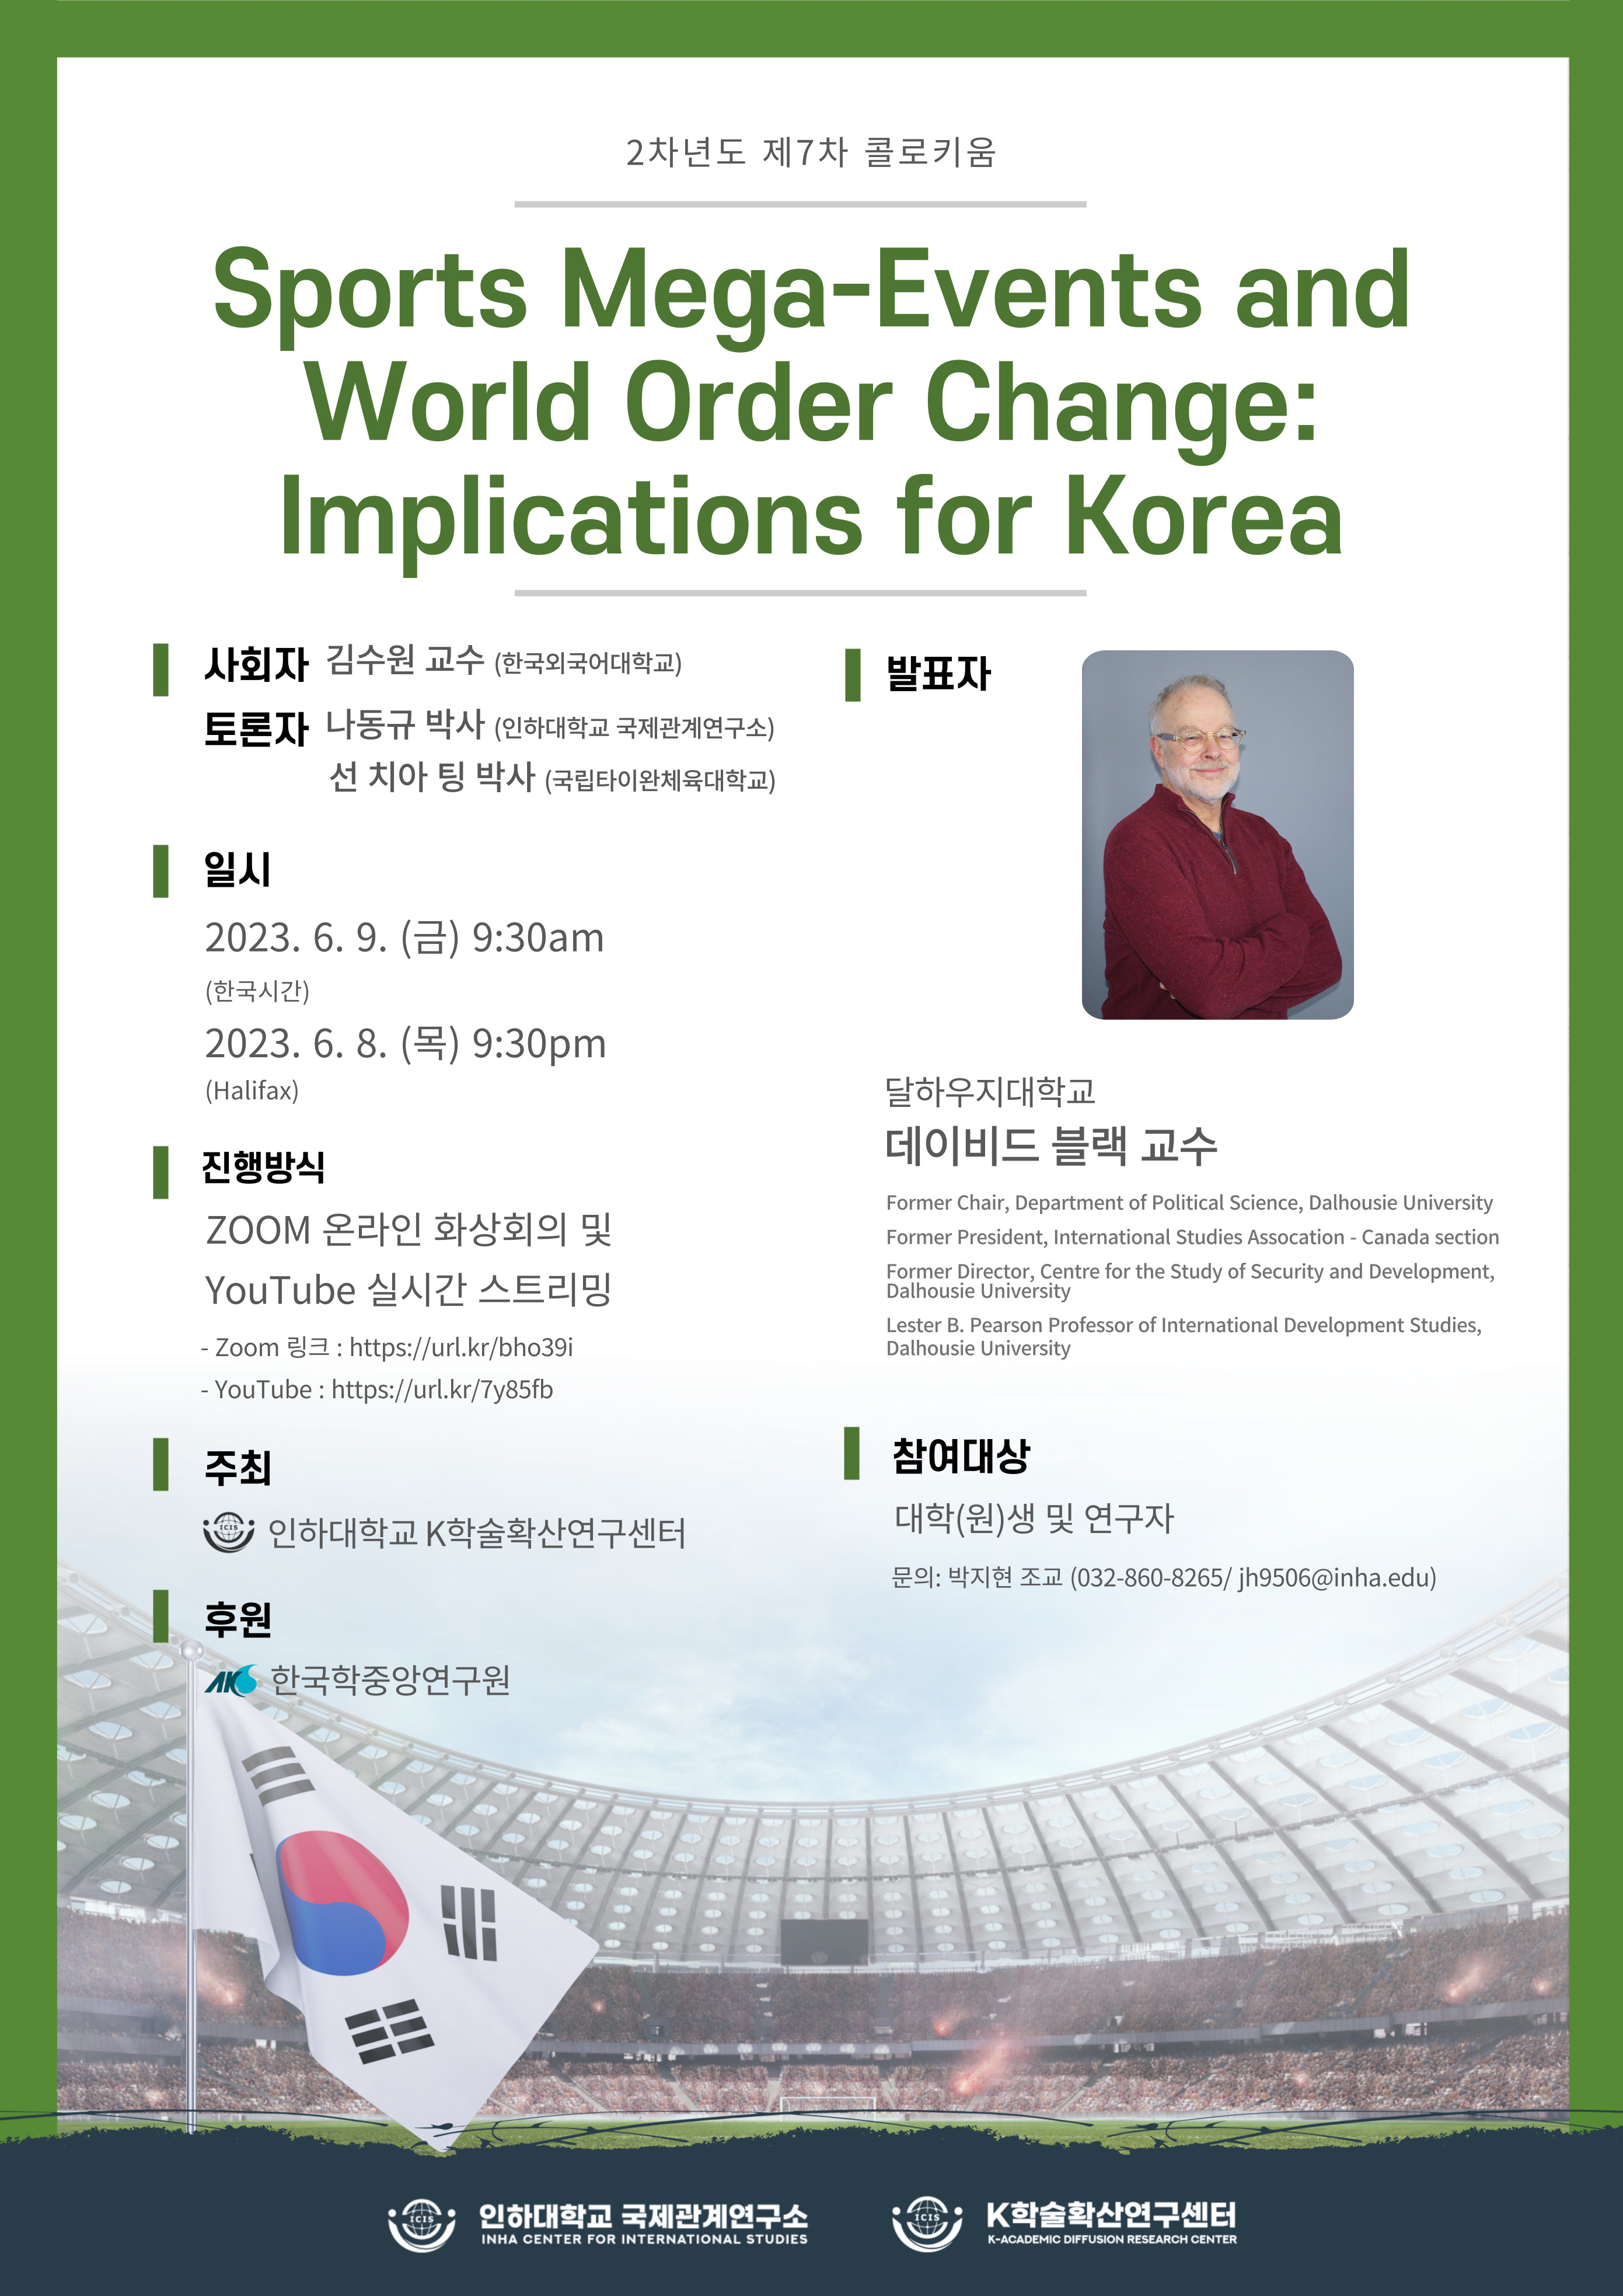 Sports Mega-Events and World Order Change: Implications for Korea                                 썸네일